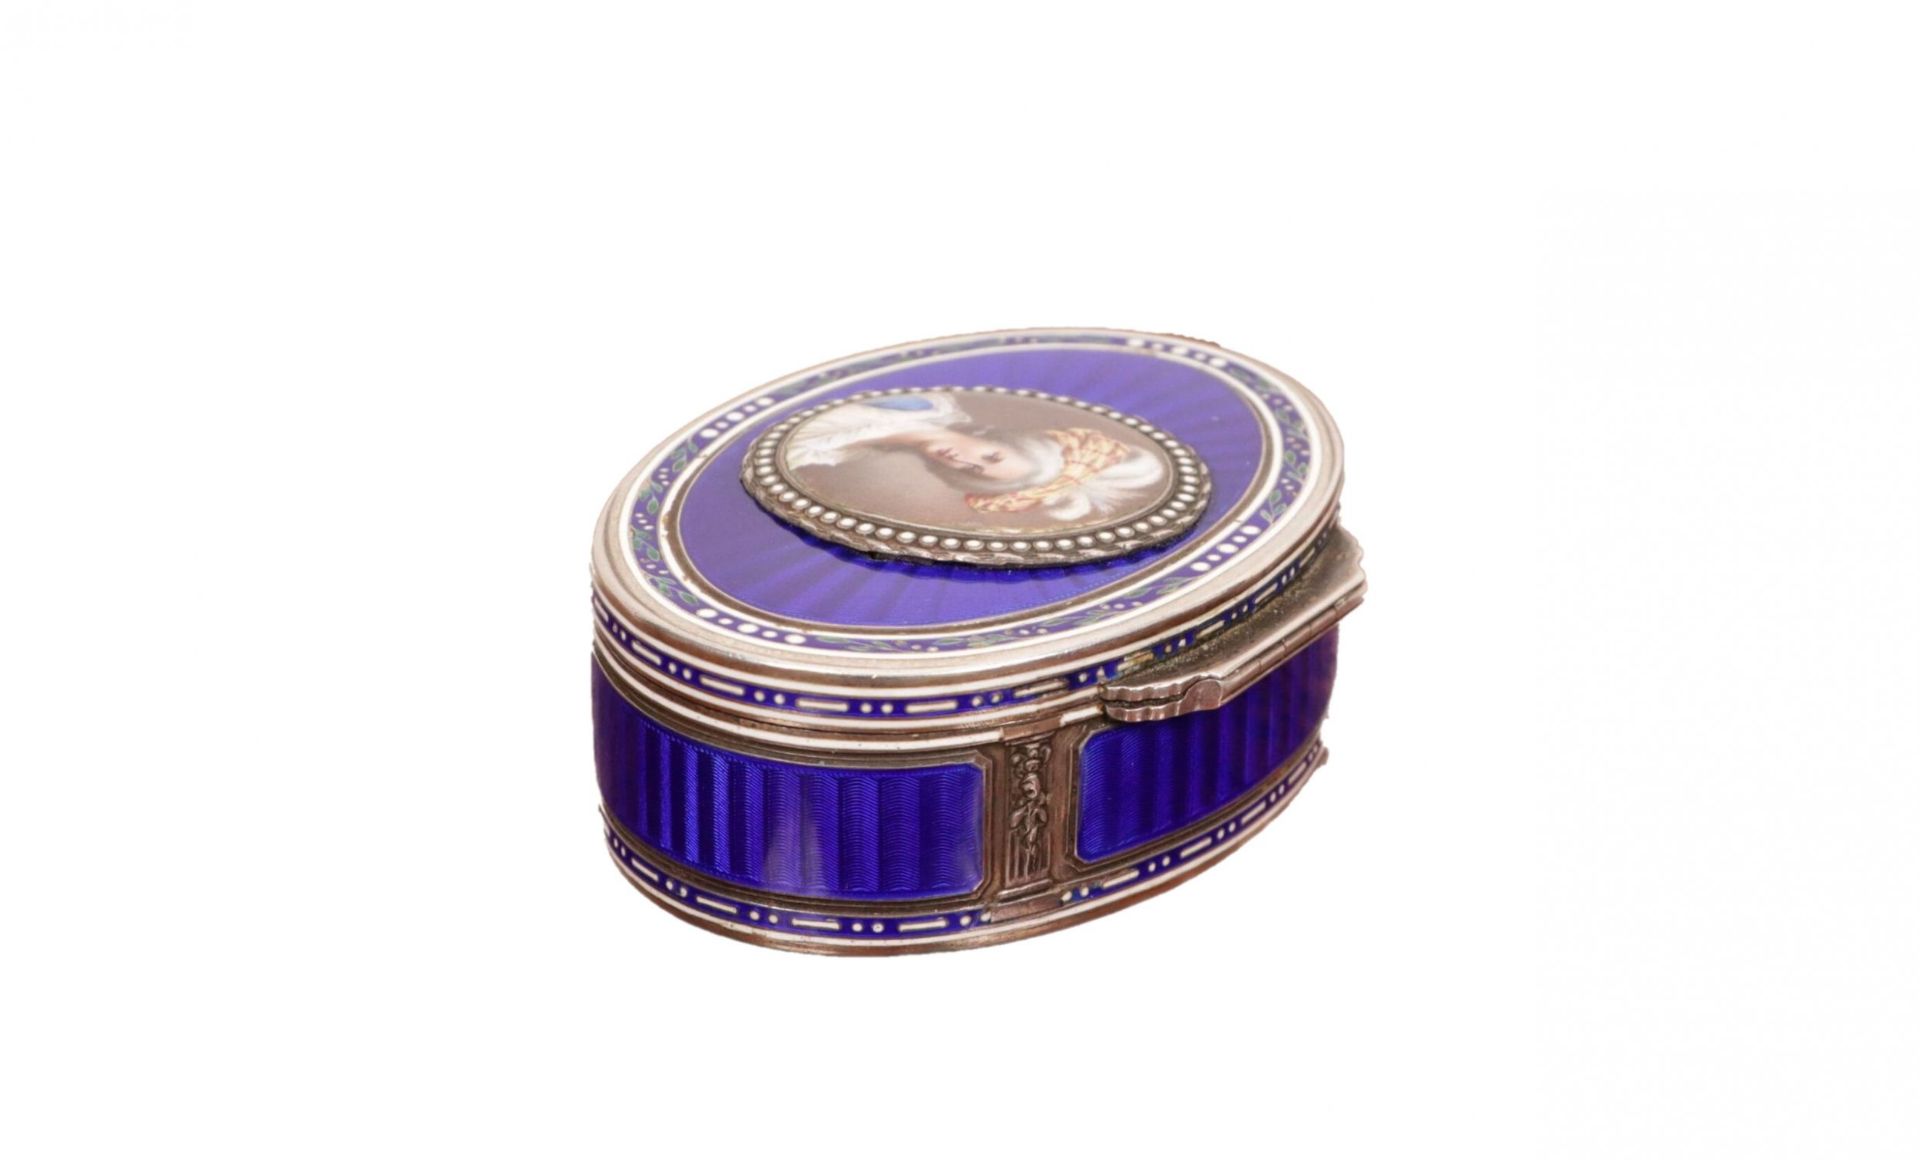 Oval box made of gilded silver with guilloche enamel decor. Early 20th century. - Image 7 of 9